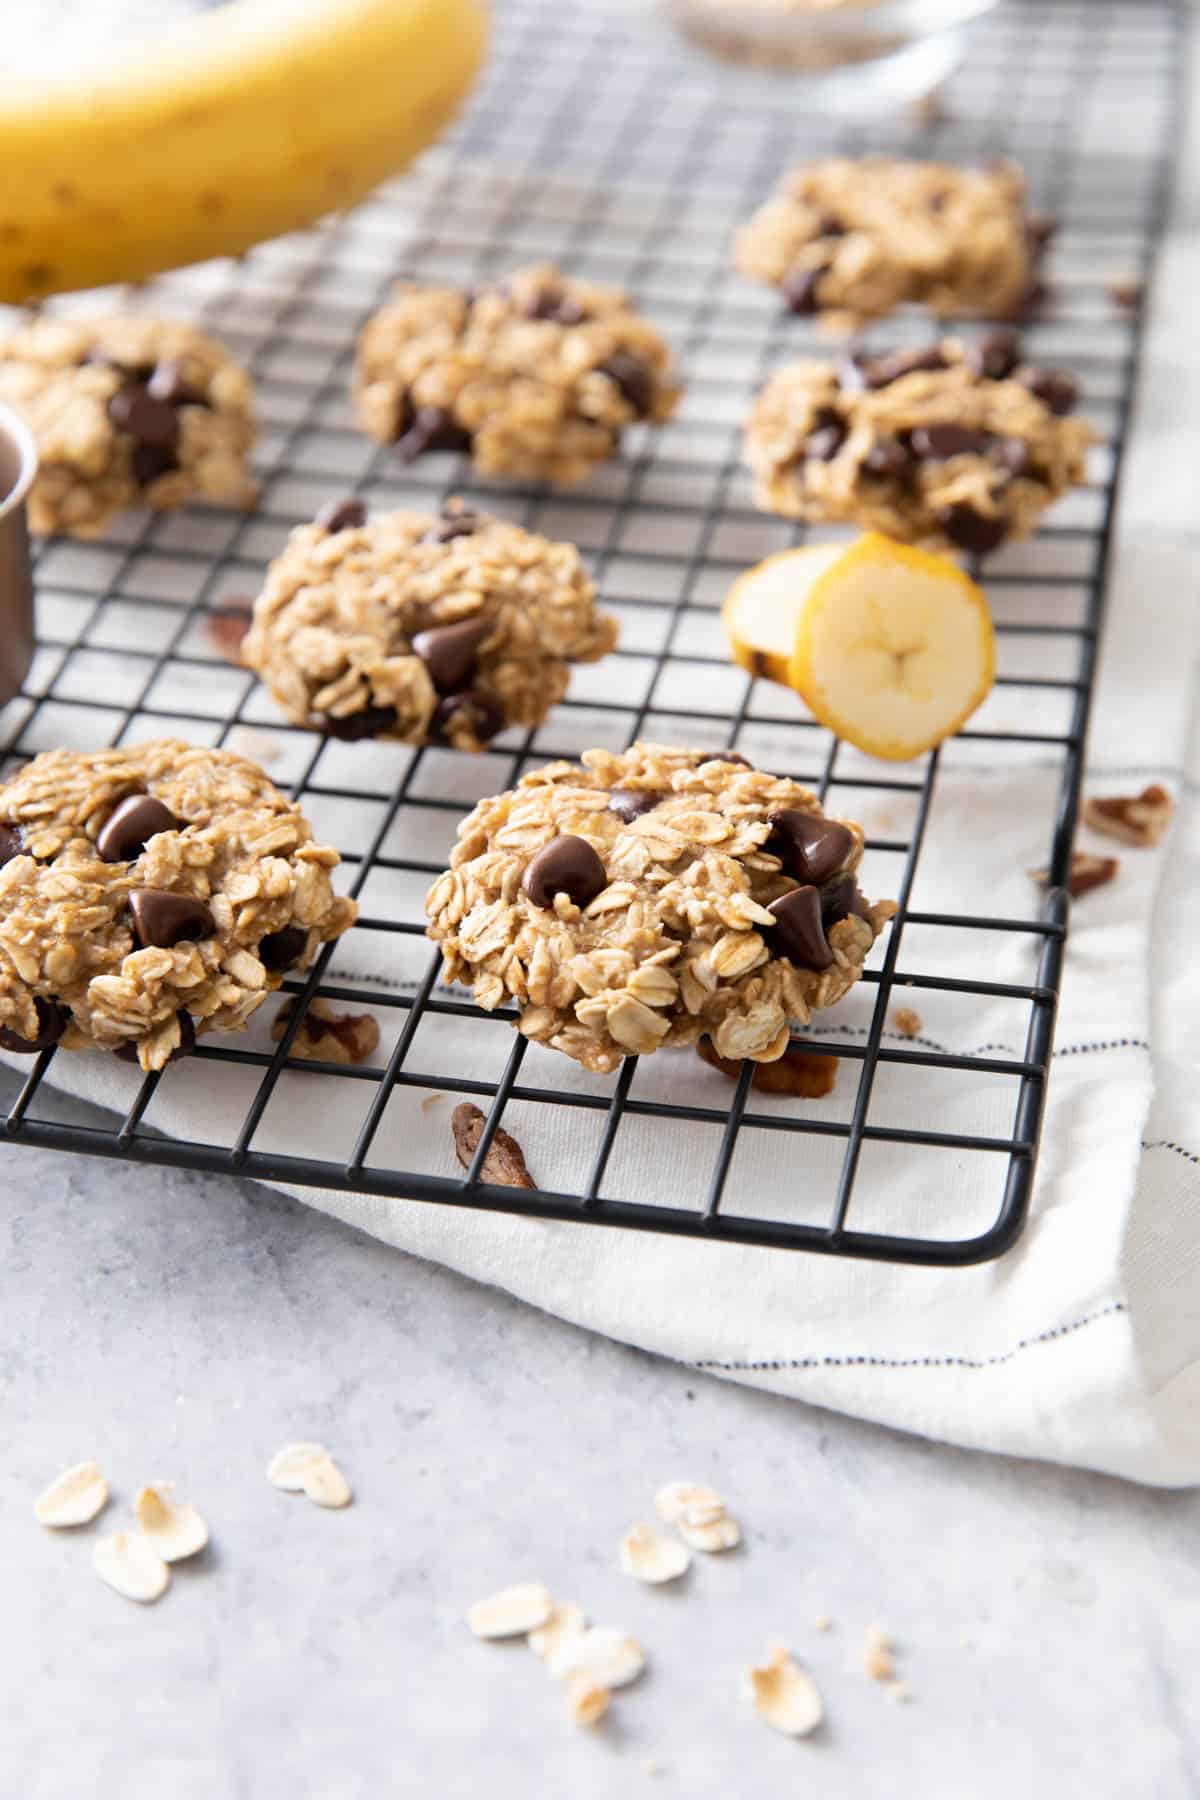 Angled treats with oats, banana pieces, and add-ins